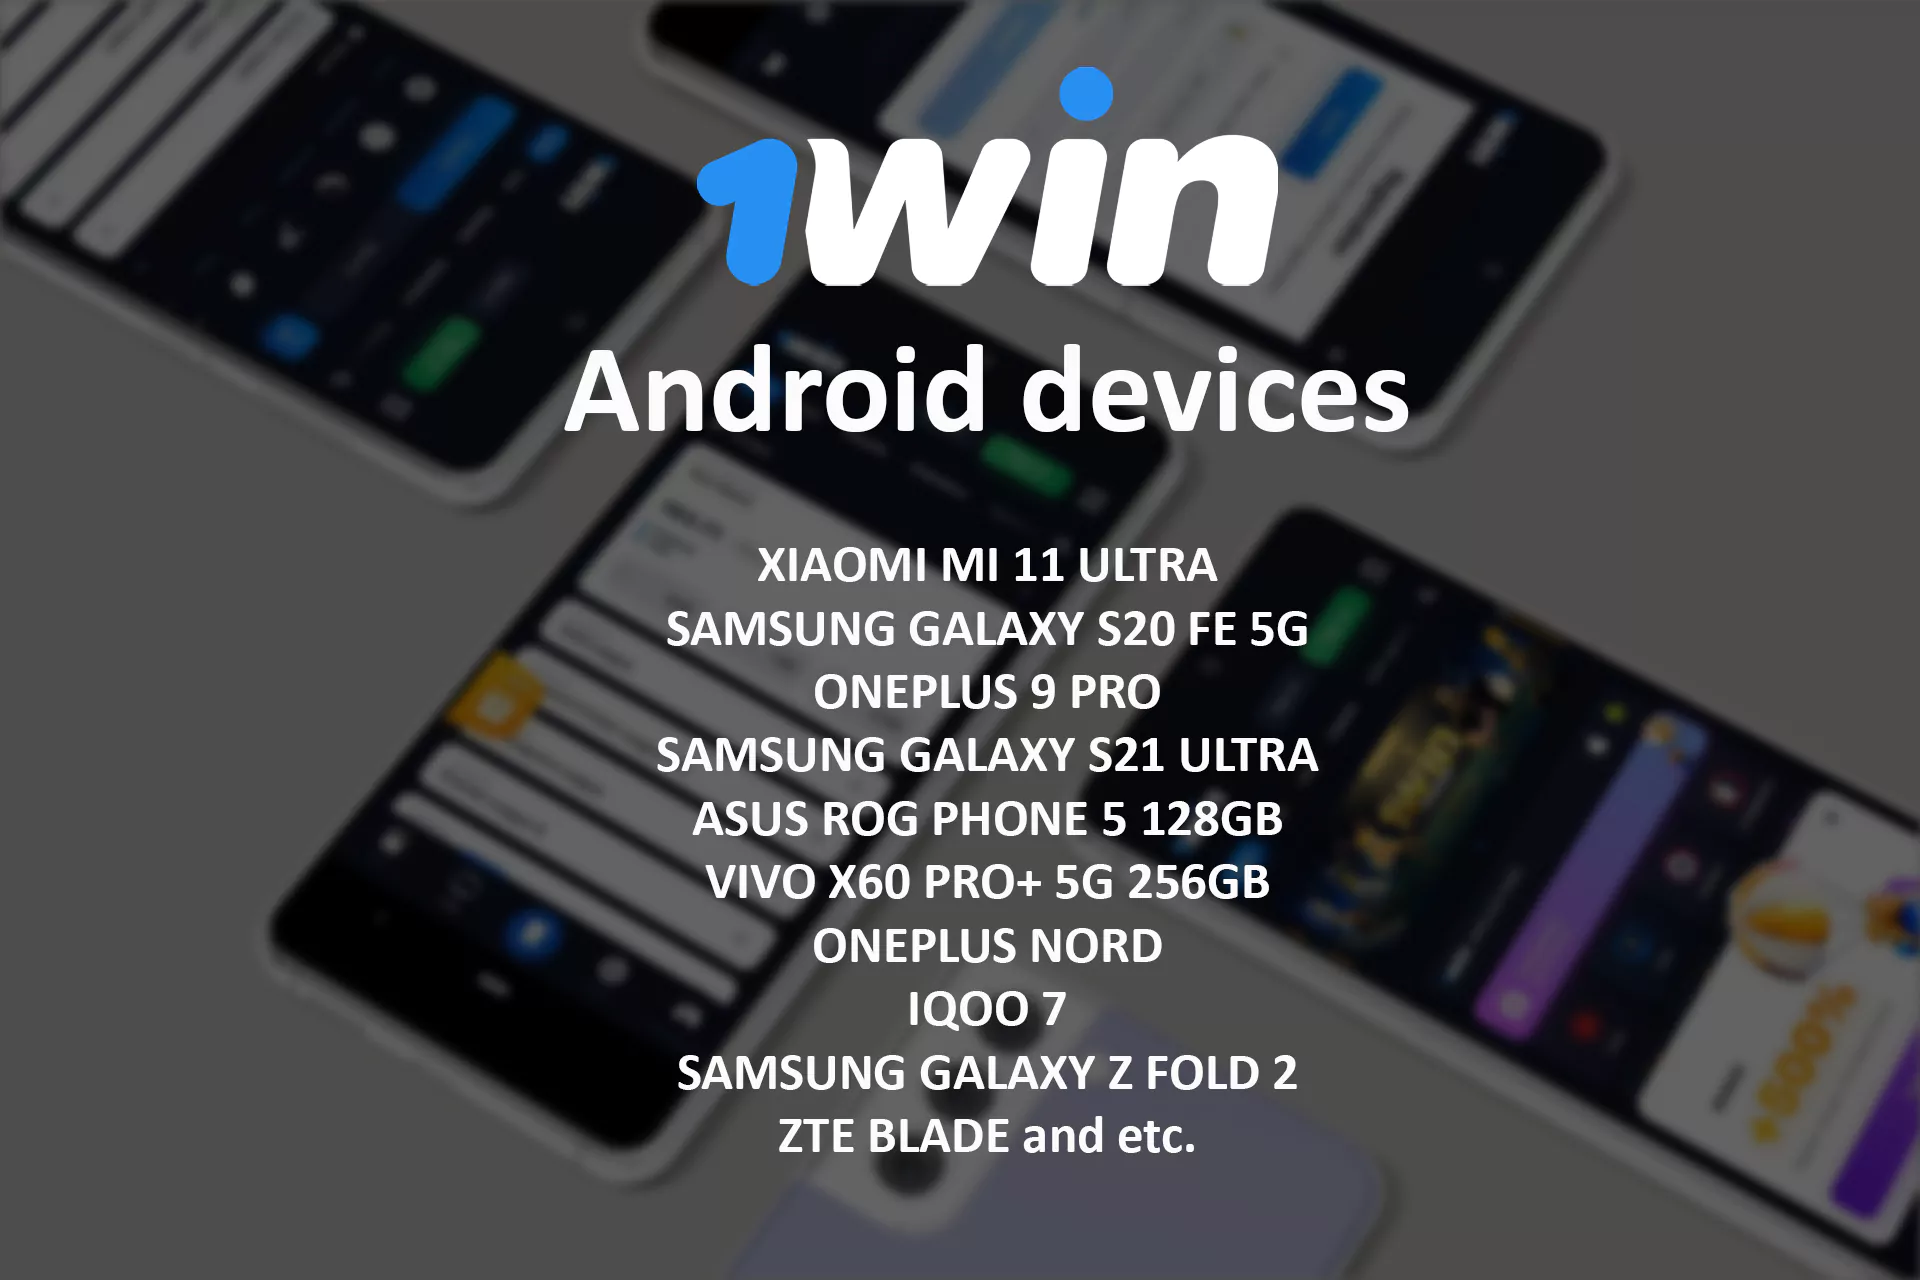 The 1Win app is supported with almost all Android devices.